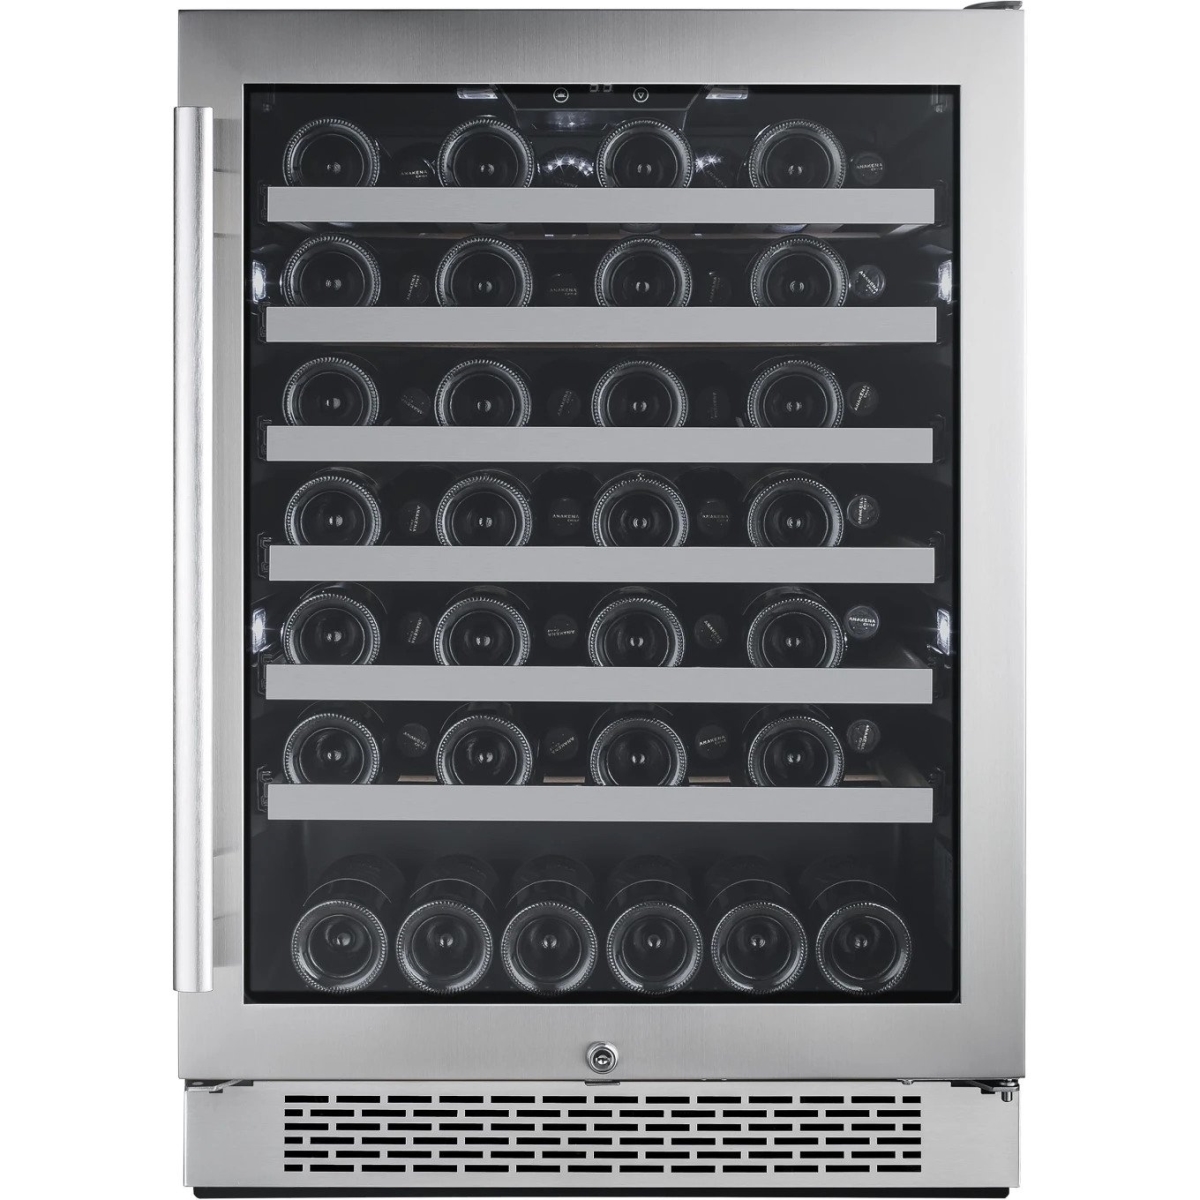 Picture of Avallon AWC242SZRH 24 in. Wide 53 Bottle Capacity Single Zone Wine Cooler with Right Swing Door, Stainless Steel - Right Hinged